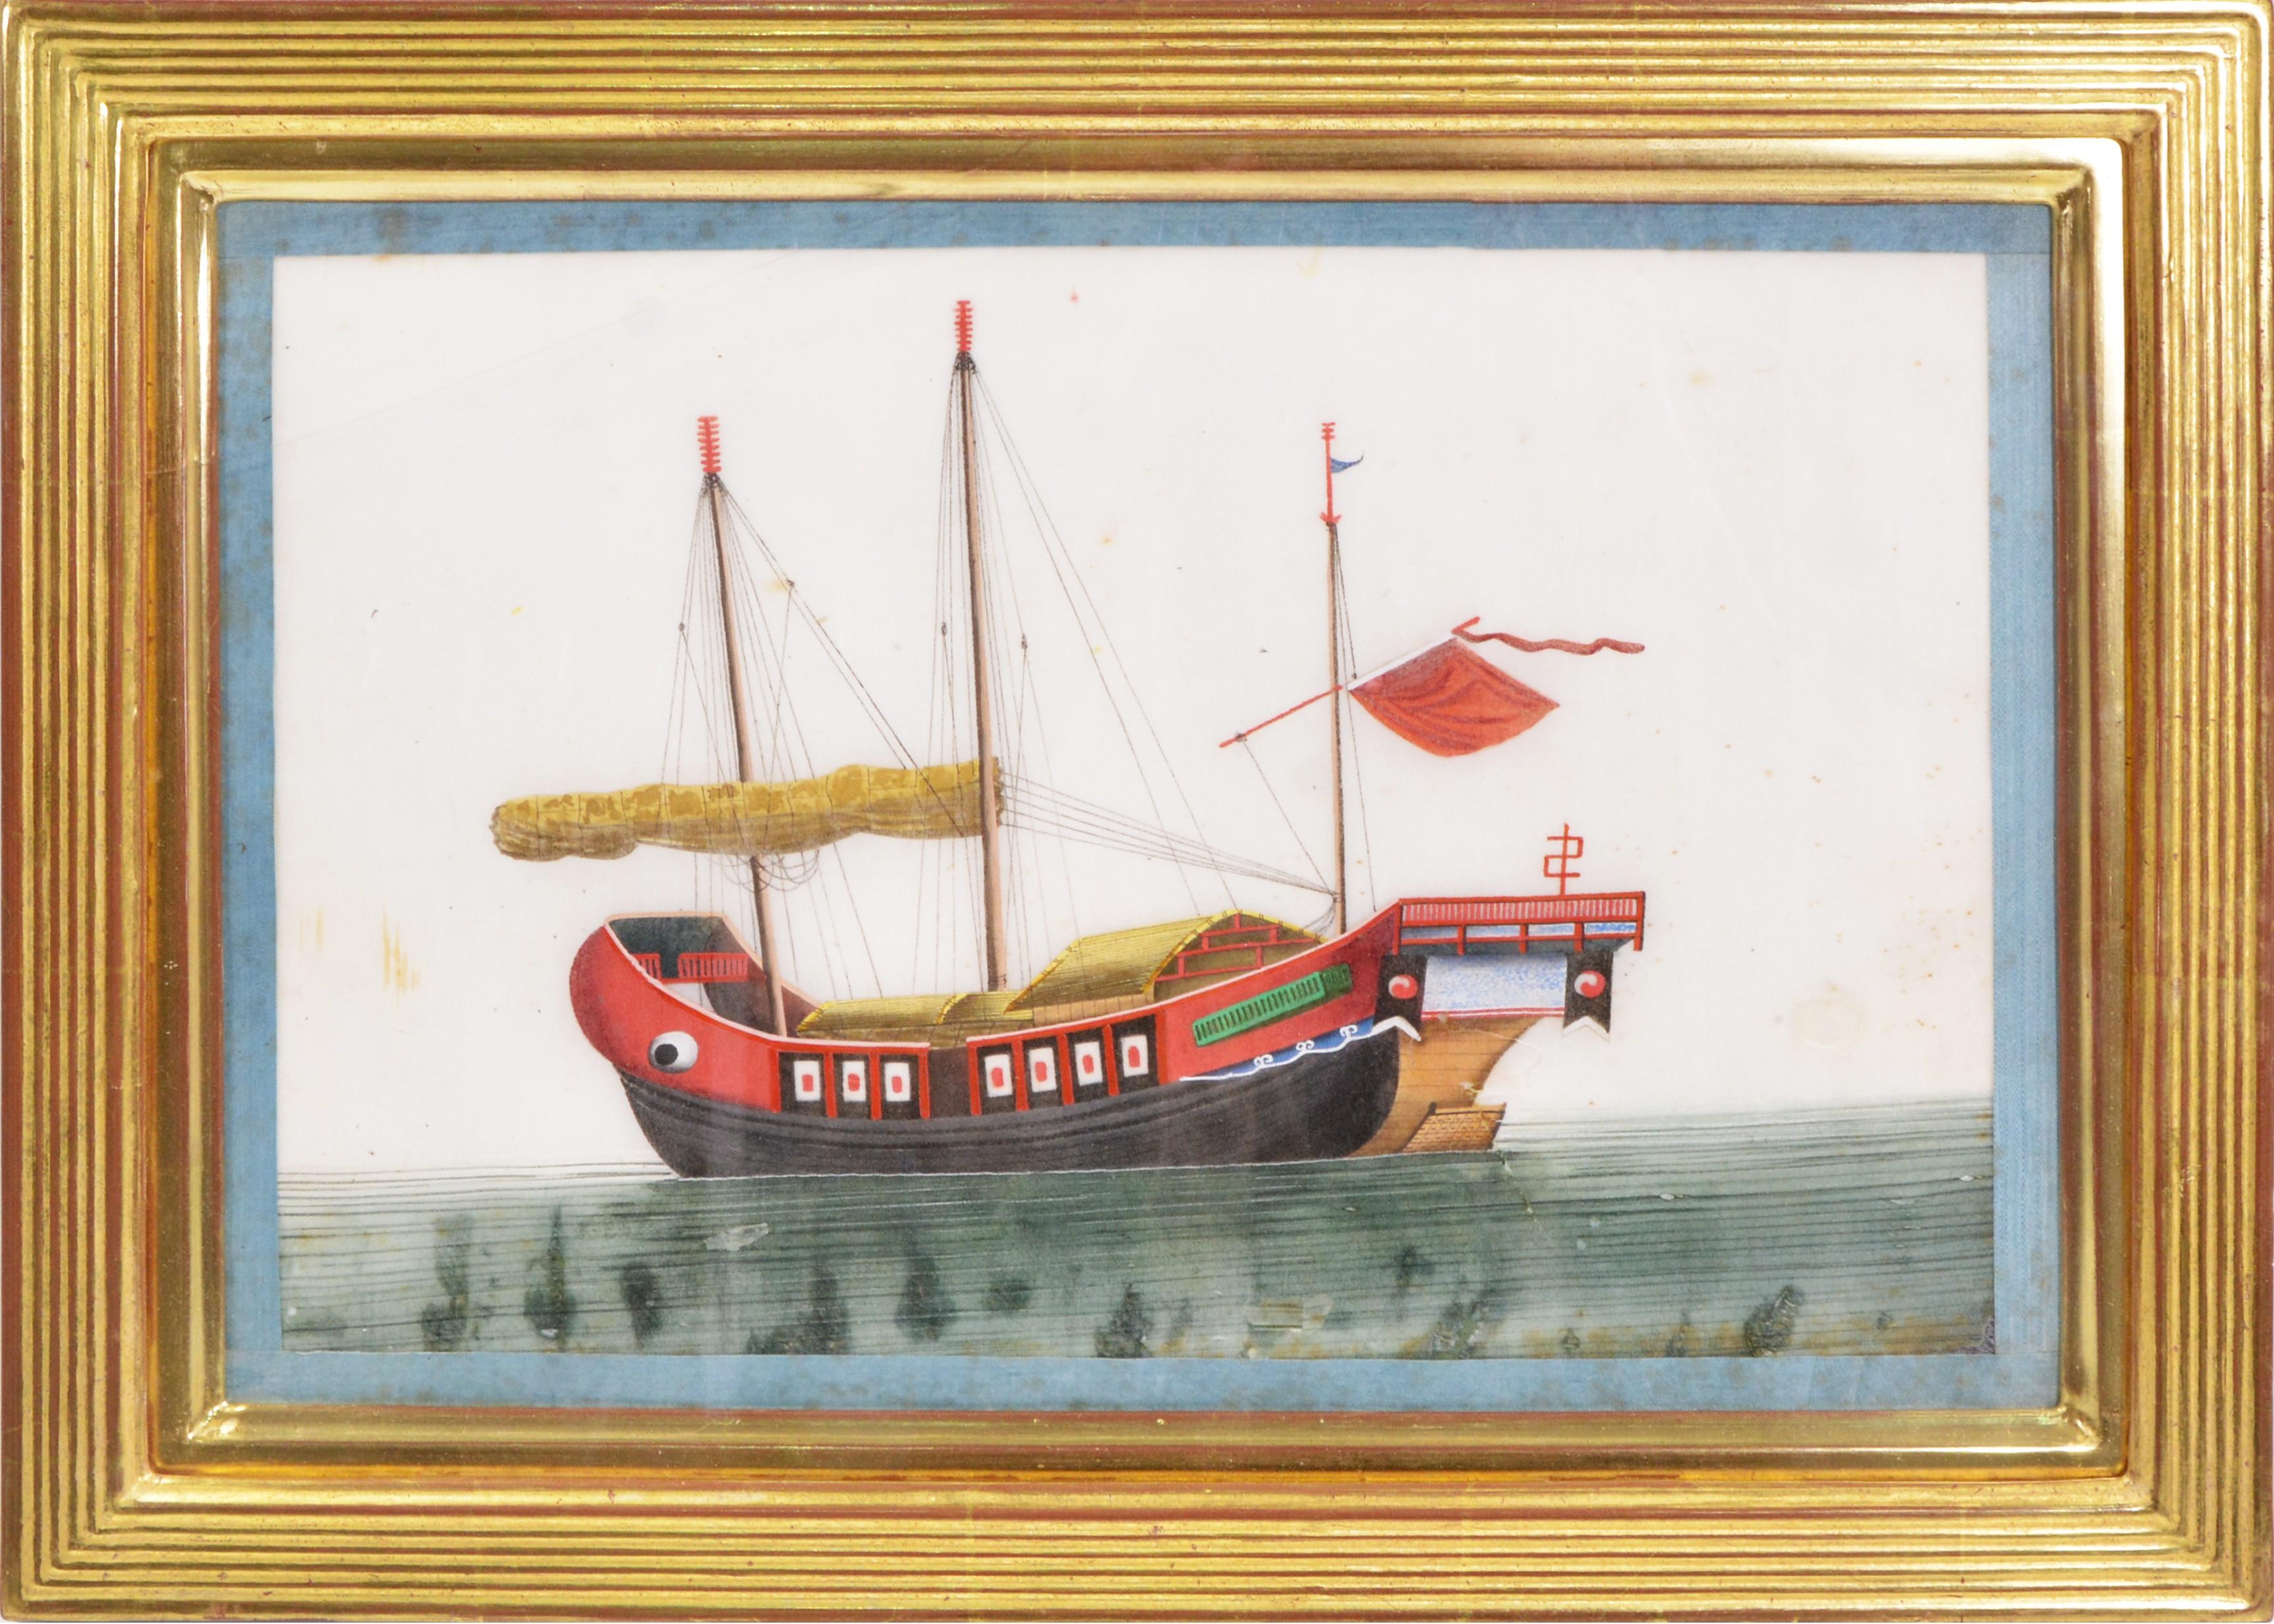 Unknown Landscape Print - A Group of Twelve Chinese Junks and Barges.